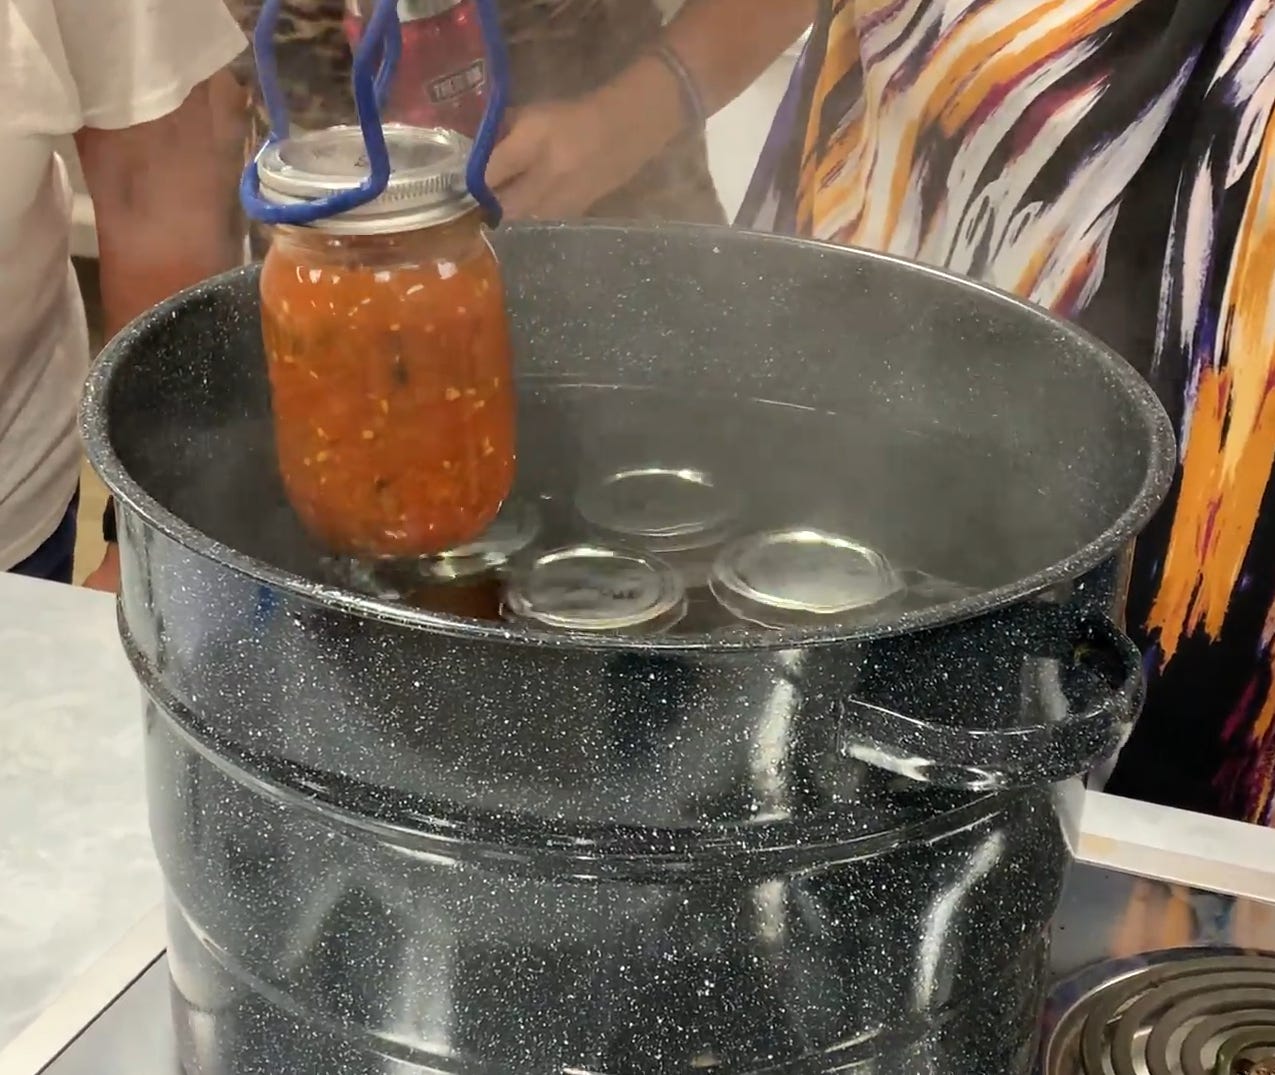 A jar of salsa being put into a water bath canner